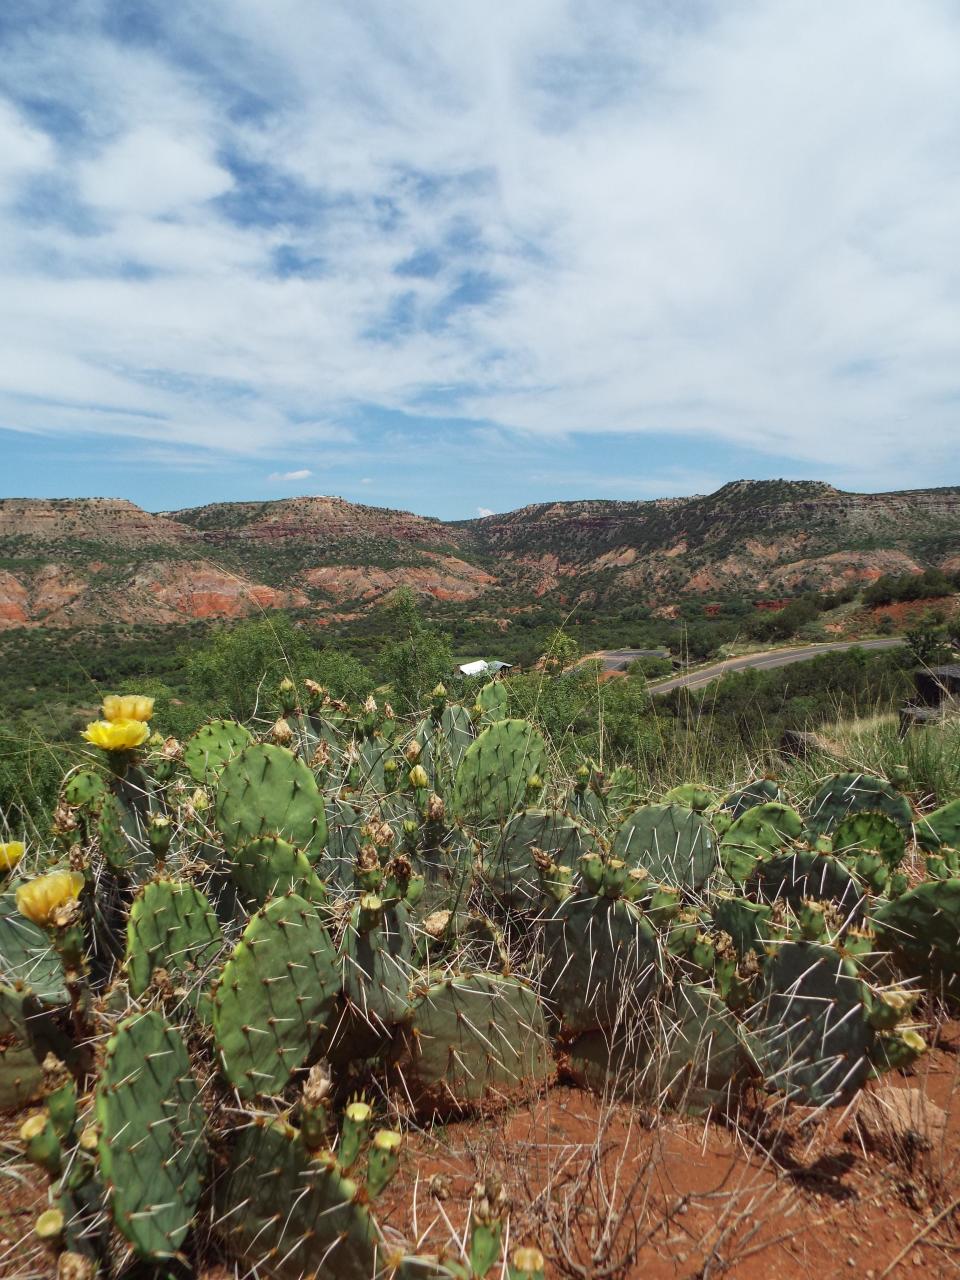 The Palo Duro Canyon Foundation and Texas State Parks welcomes the community to celebrate 100 years of Texas State Parks with the Prairie Palooza, set for Saturday in the Palo Duro Canyon State Park.